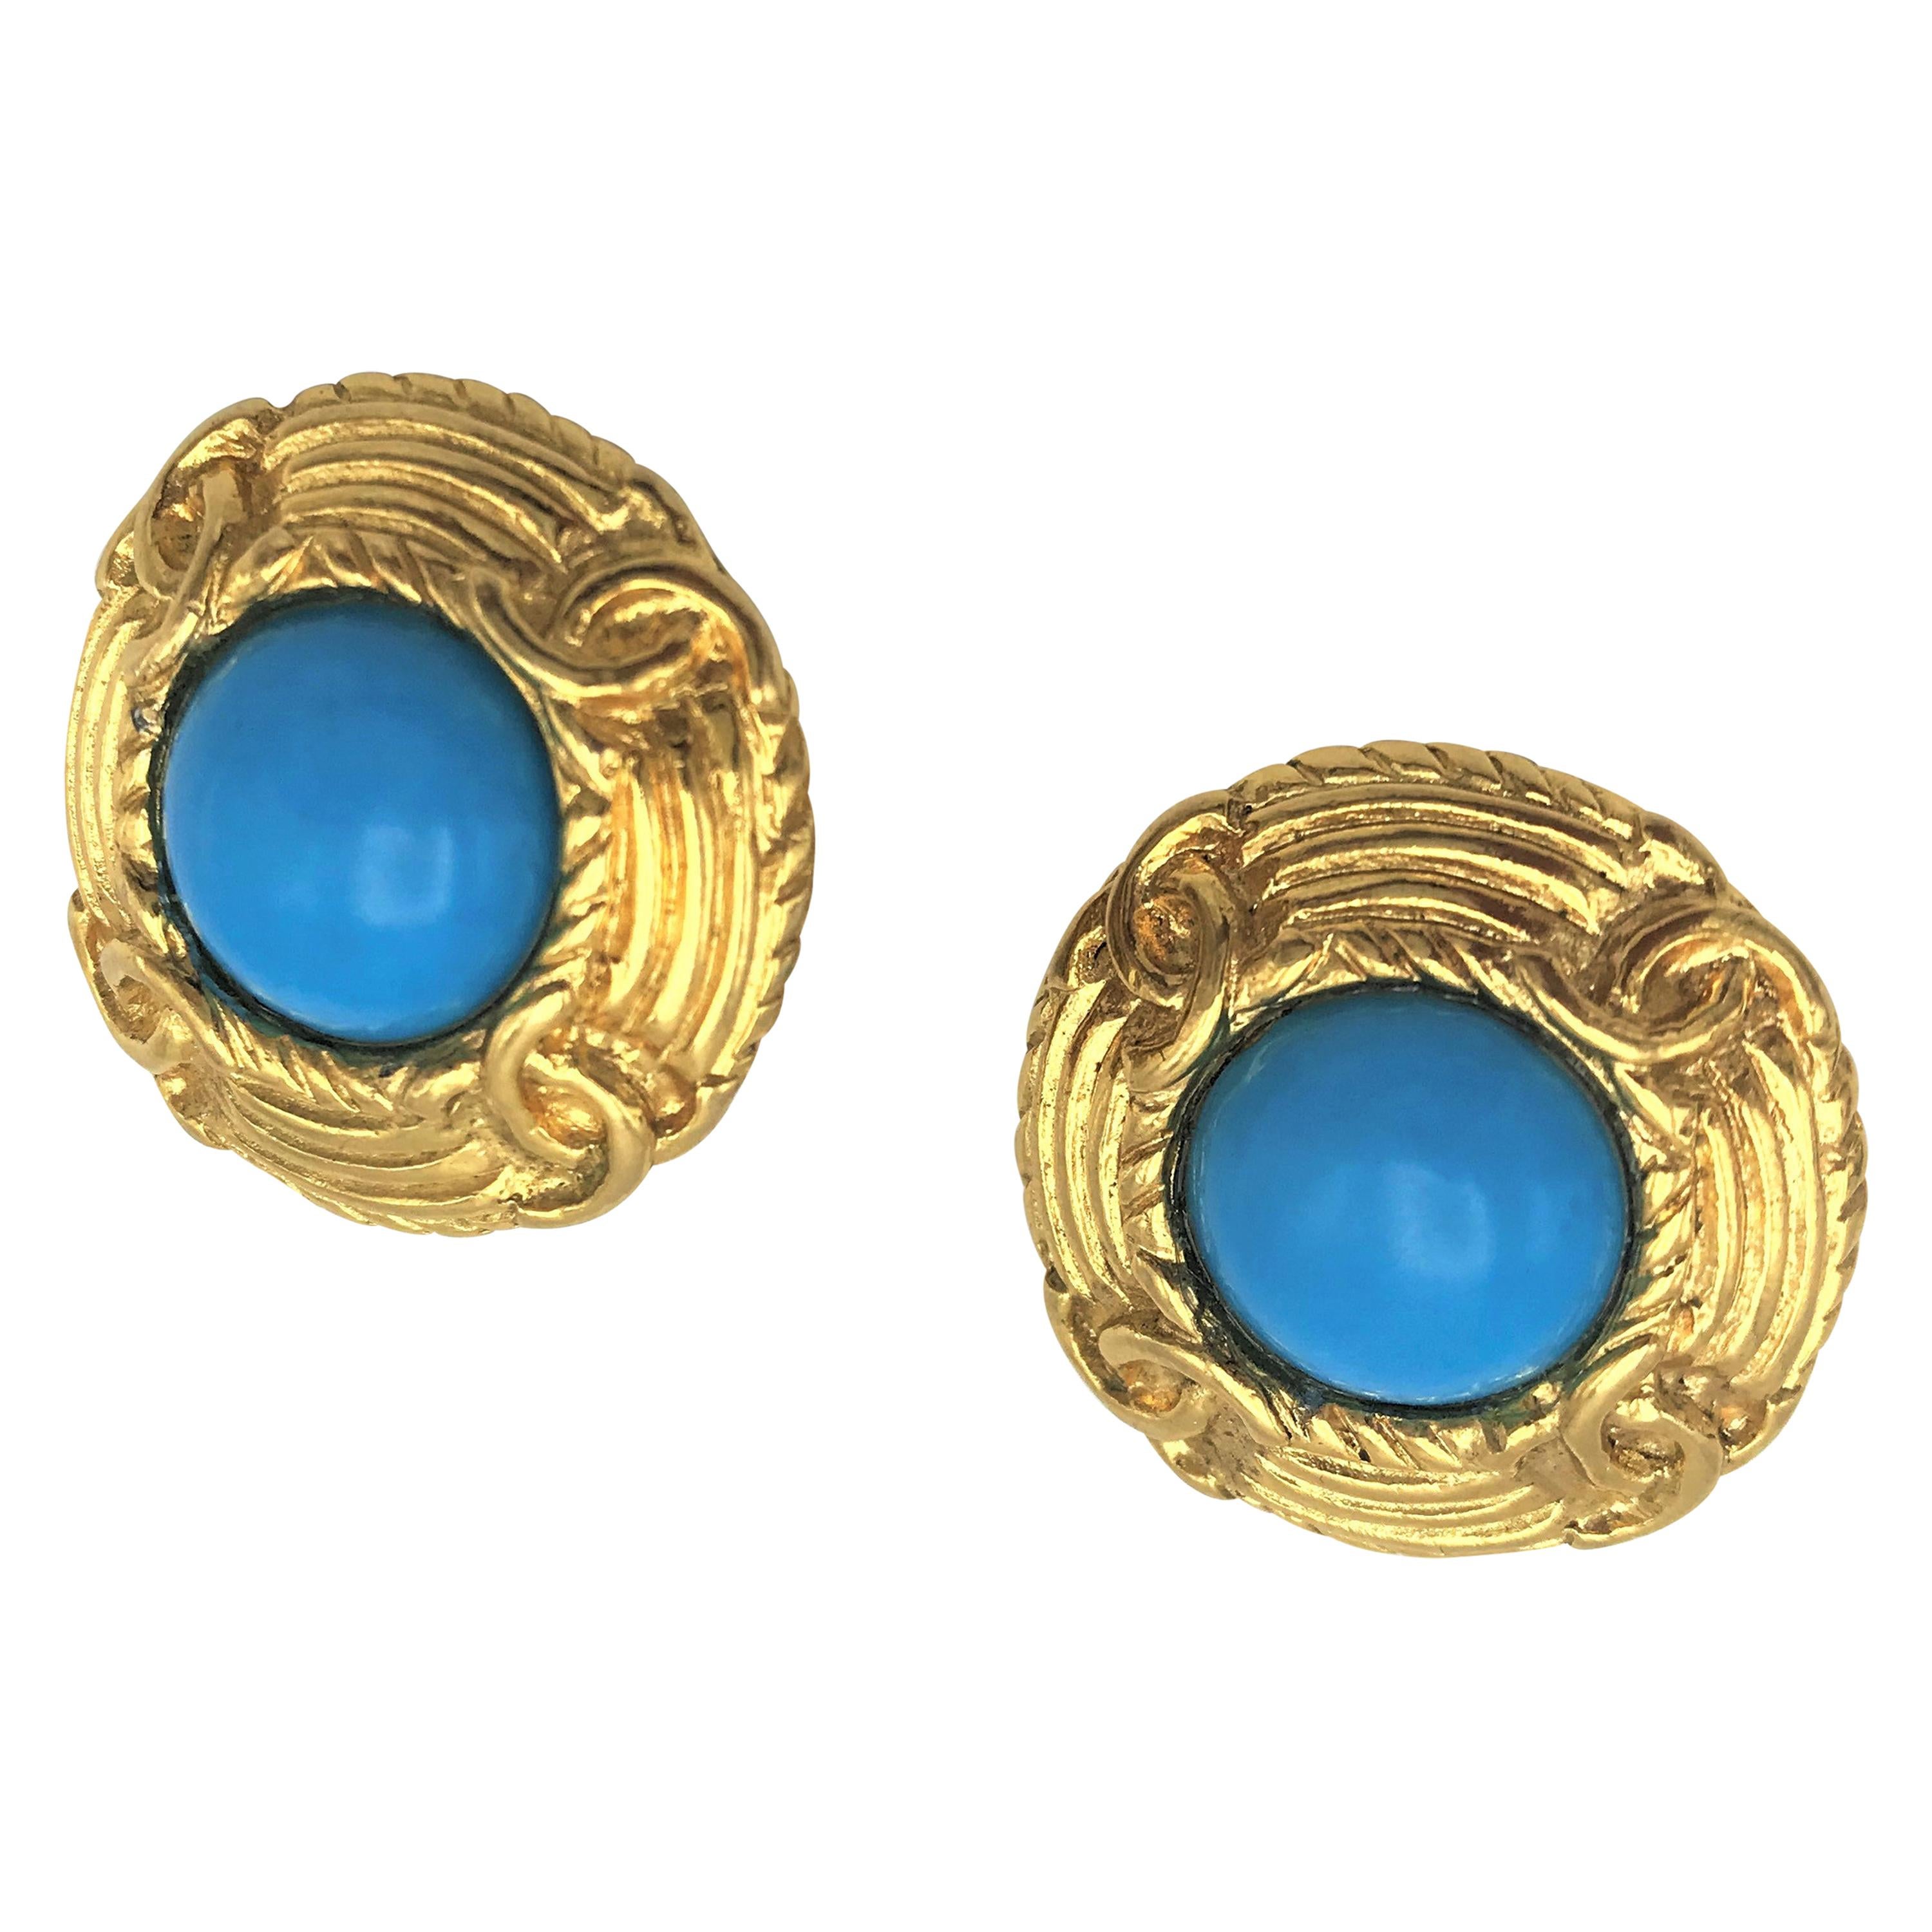 Karl Lagerfeld for Chanel - Vintage Chanel Clip-On Earring Paris 70/80s Cabochon French Artisan Turquoise Gold Plate